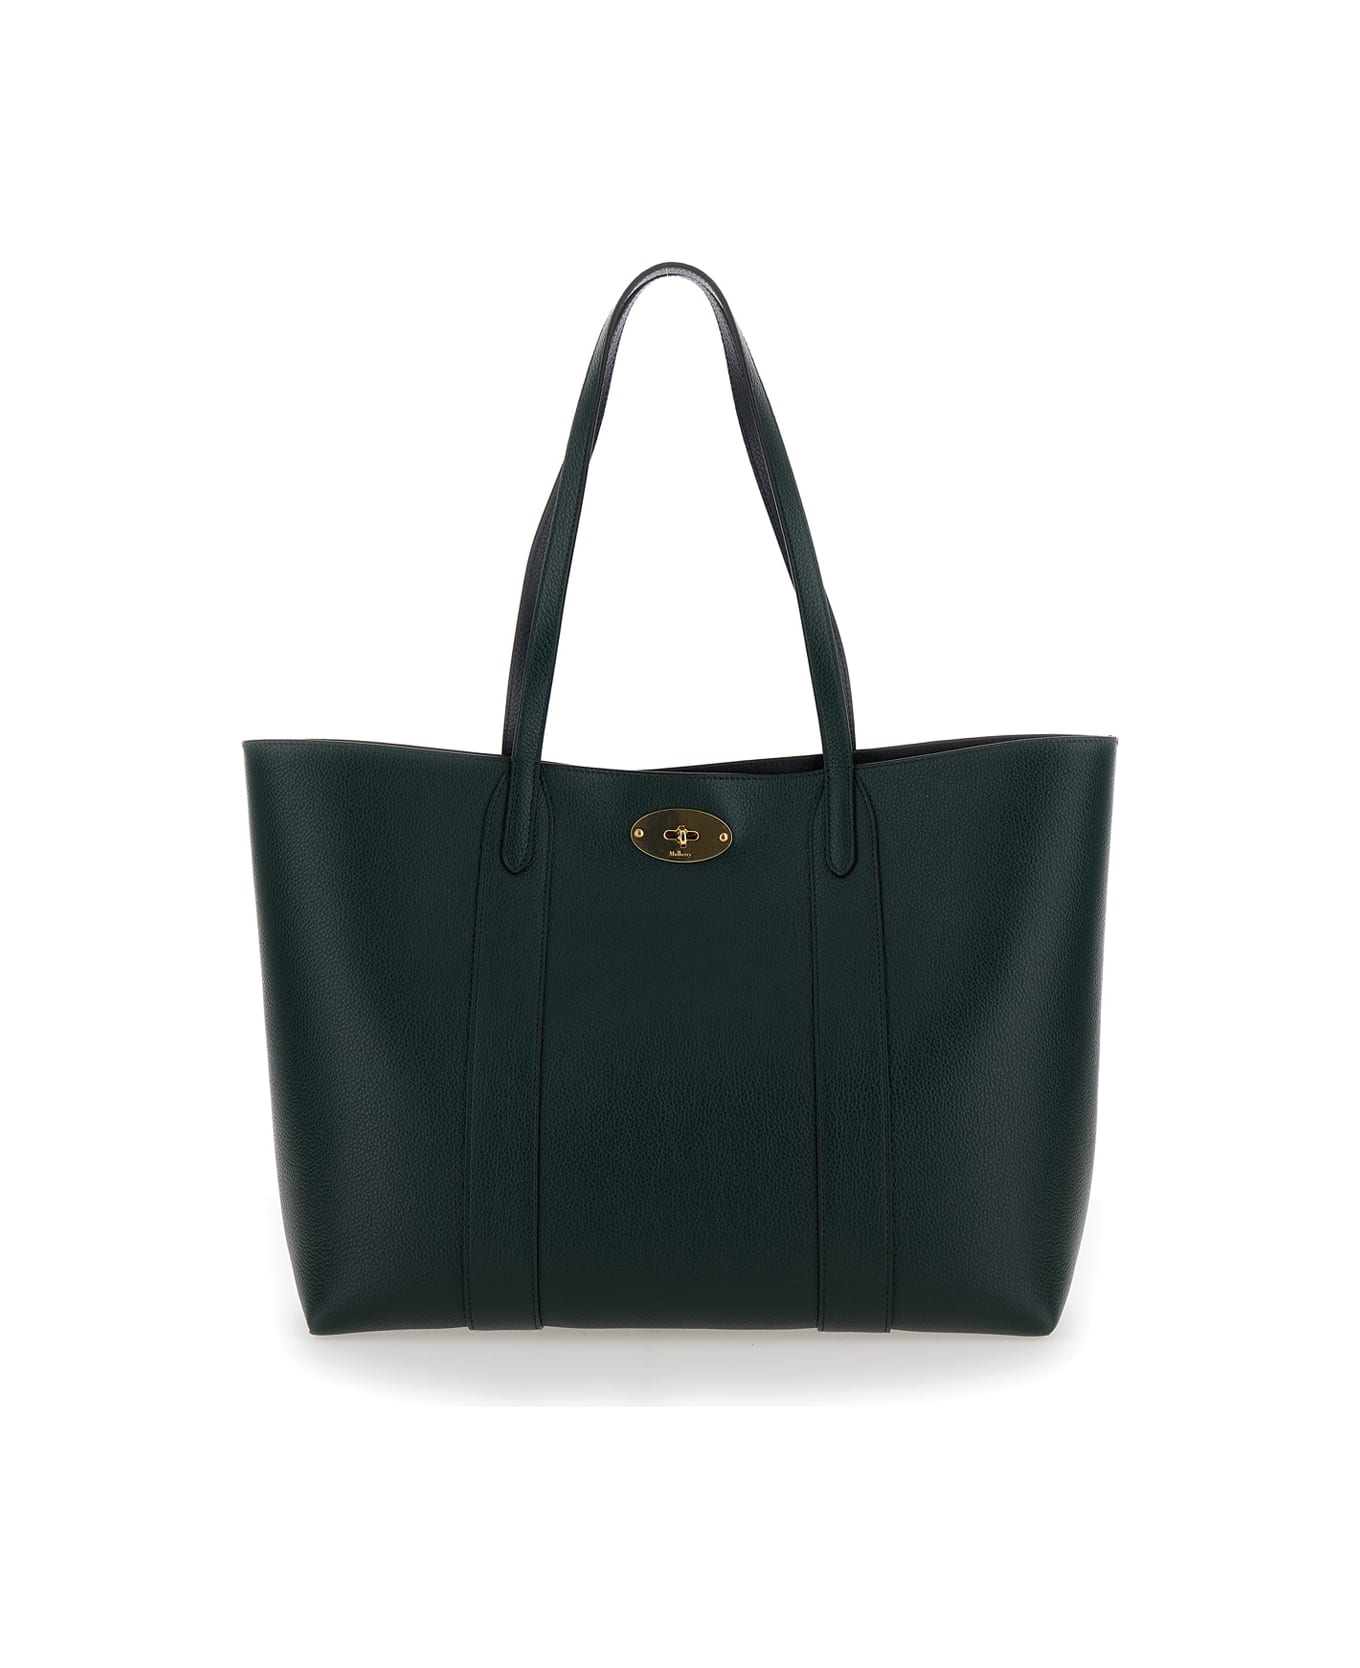 Mulberry 'bayswater Small' Green Tote Bag With Postman's Lock Closure In Leather Woman - Green